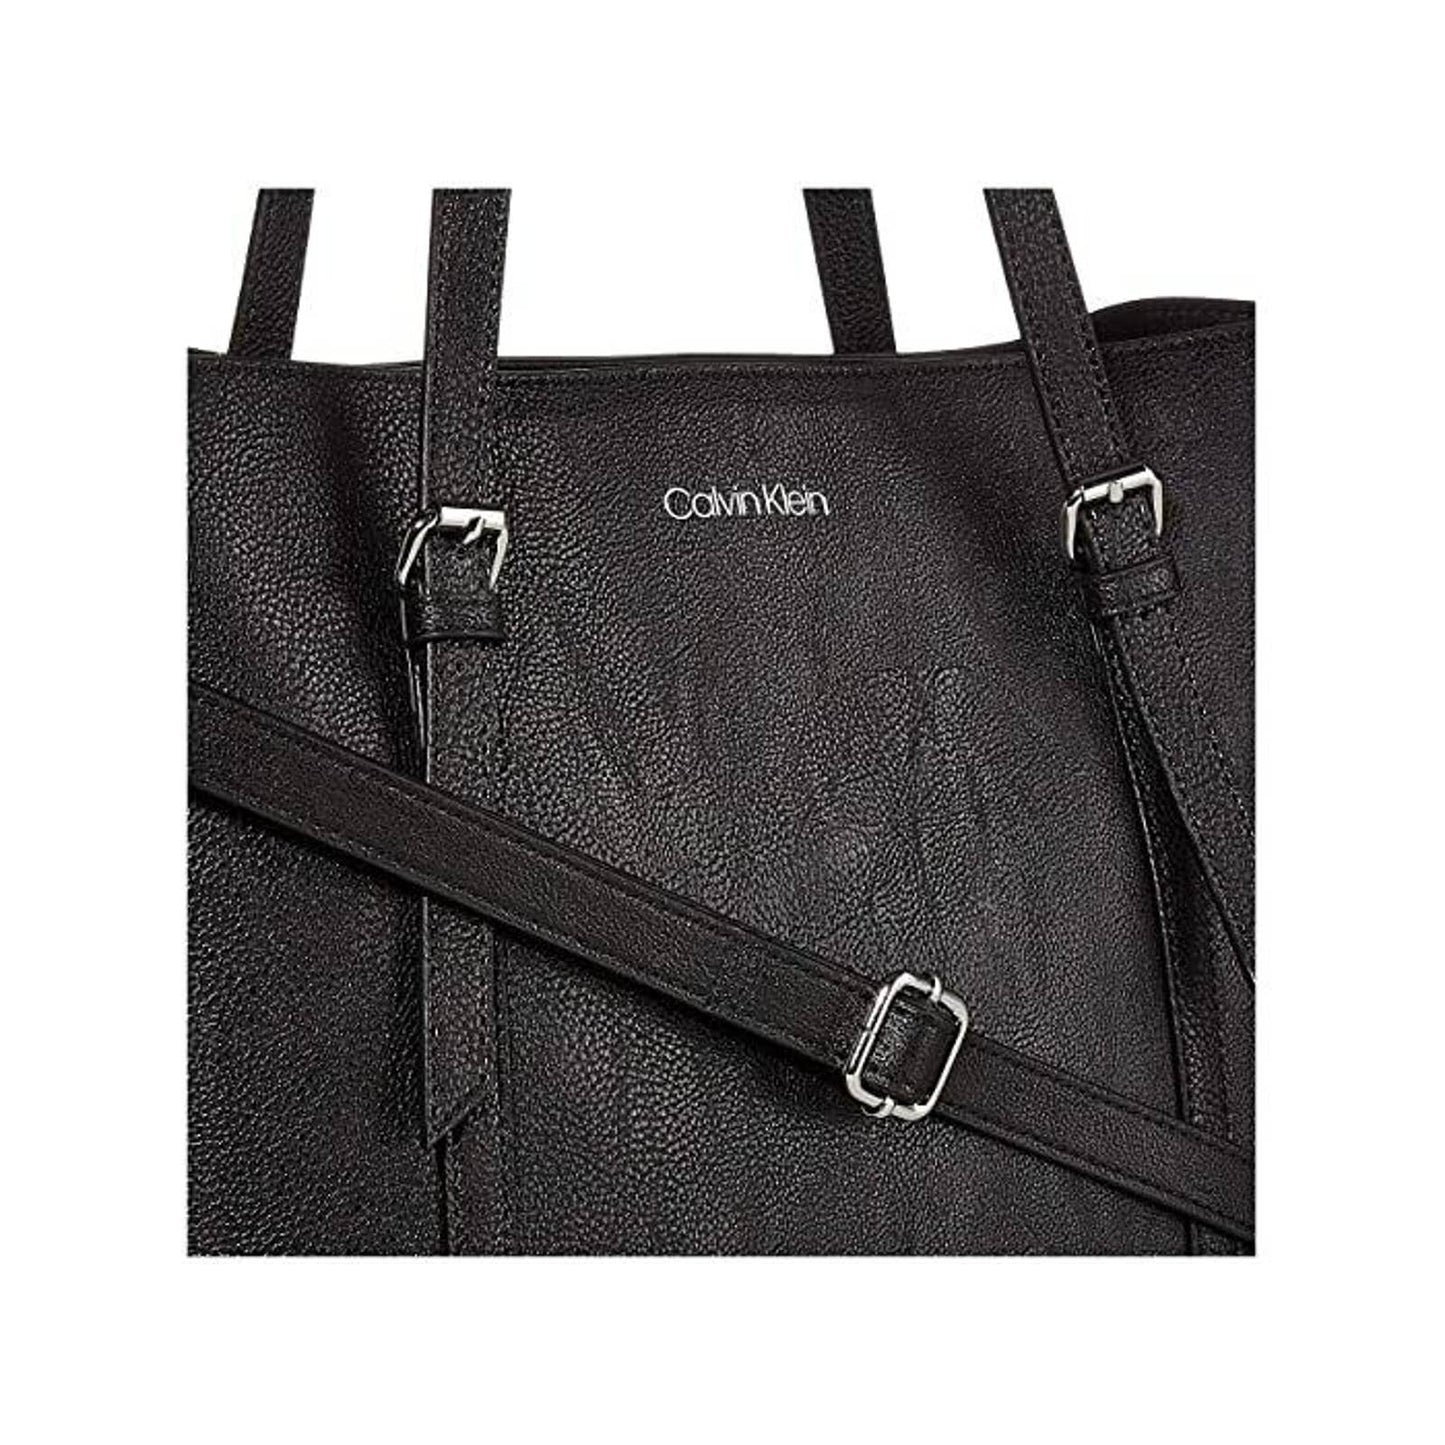 CALVIN KLEIN PYC EAST WEST LEATHER TOTE DOUBLE STRAP, BLACK SILVER